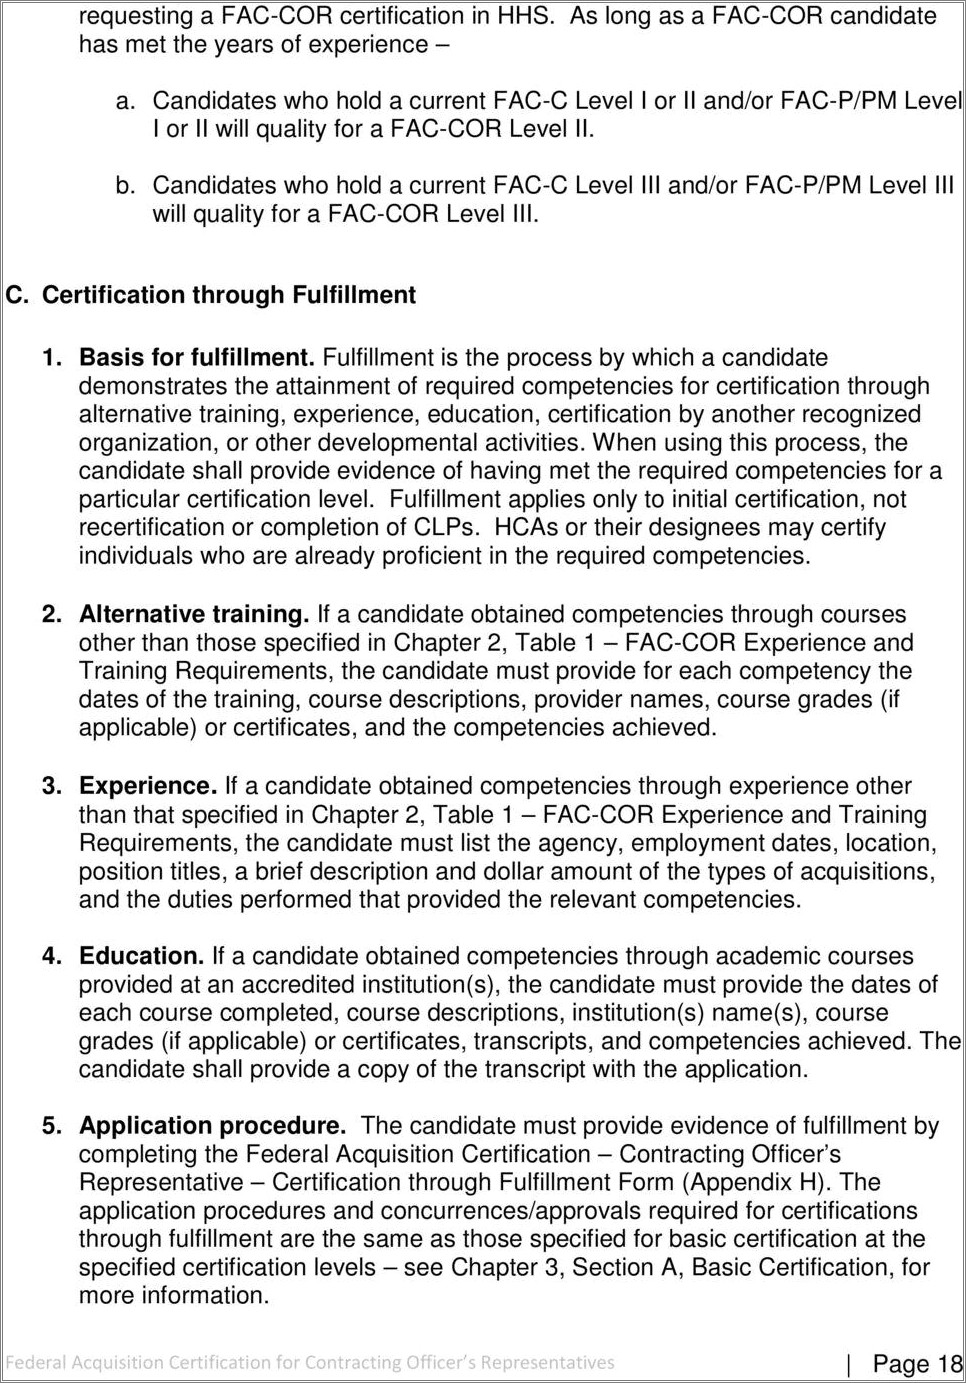 Contract Specialist Resume For Fac C Certification Example